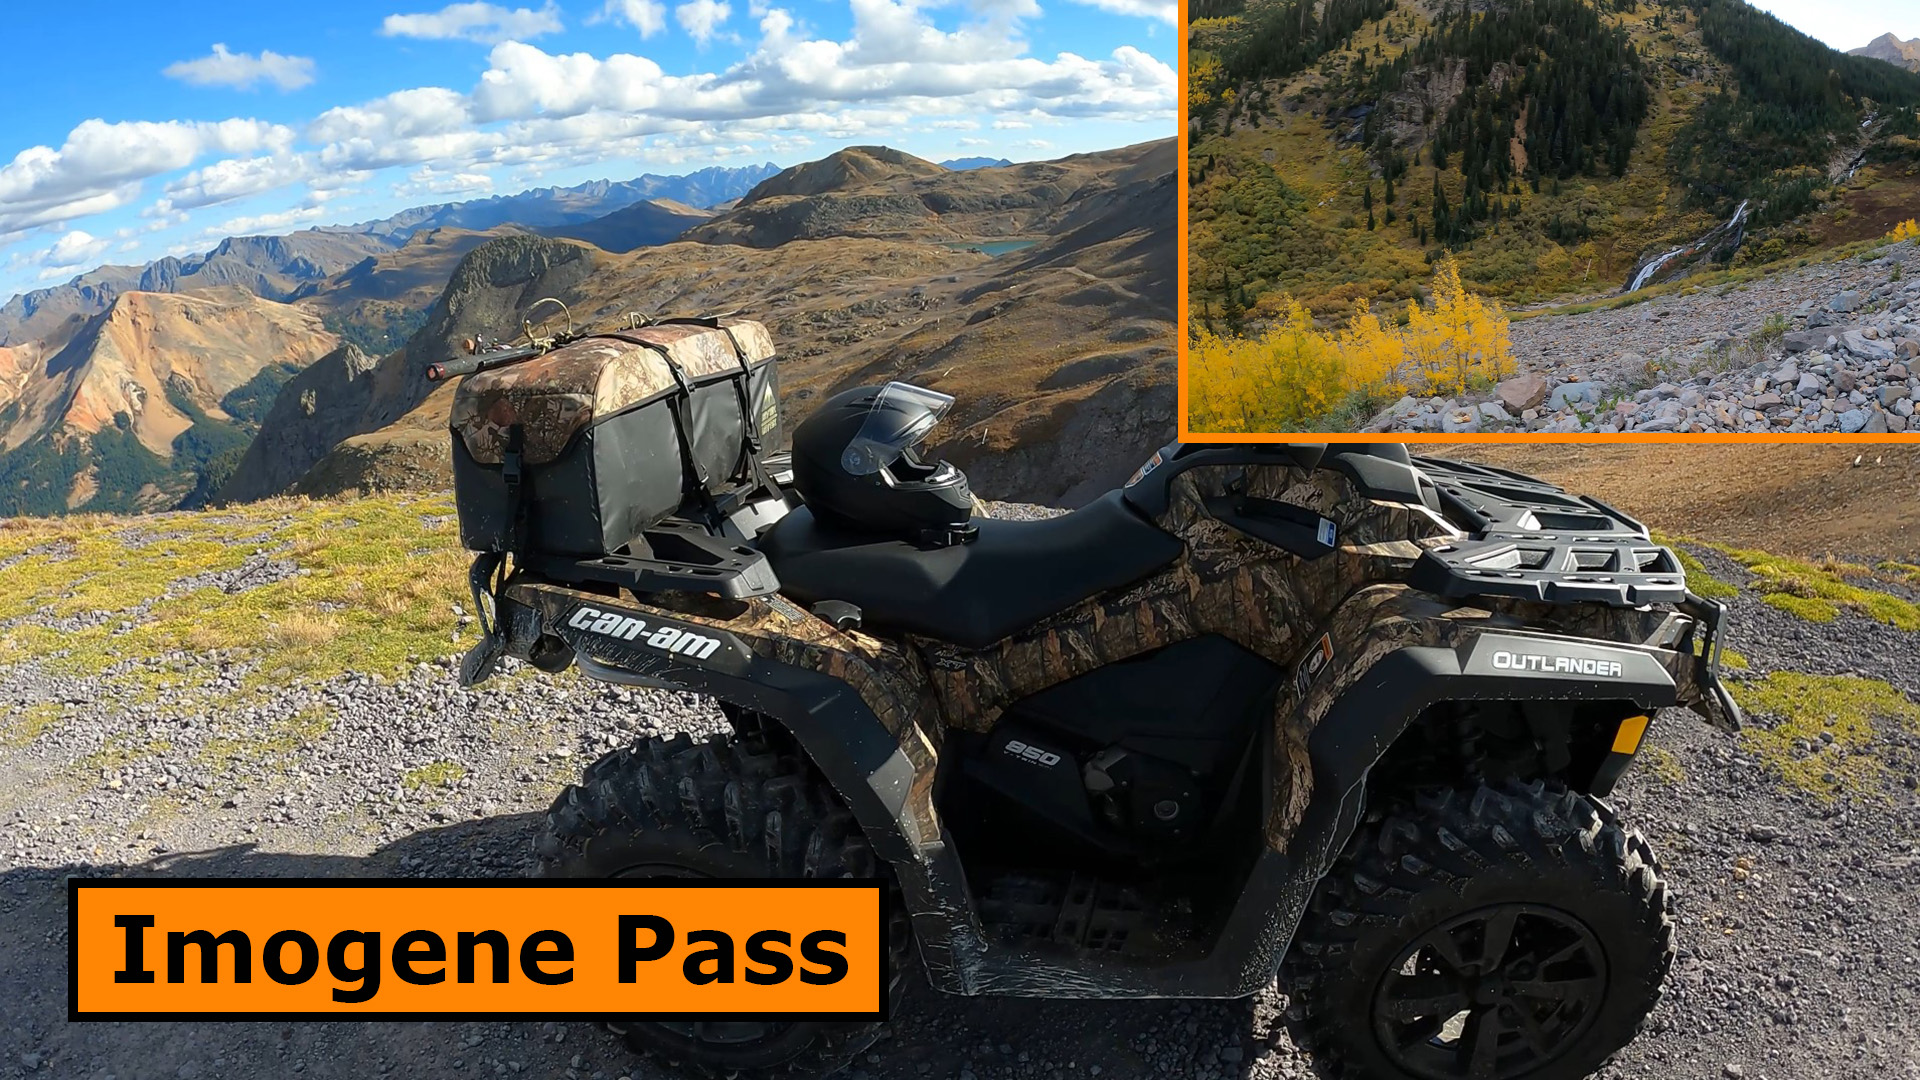 Off Road on Imogene pass between Ouray and Telluride Colorado